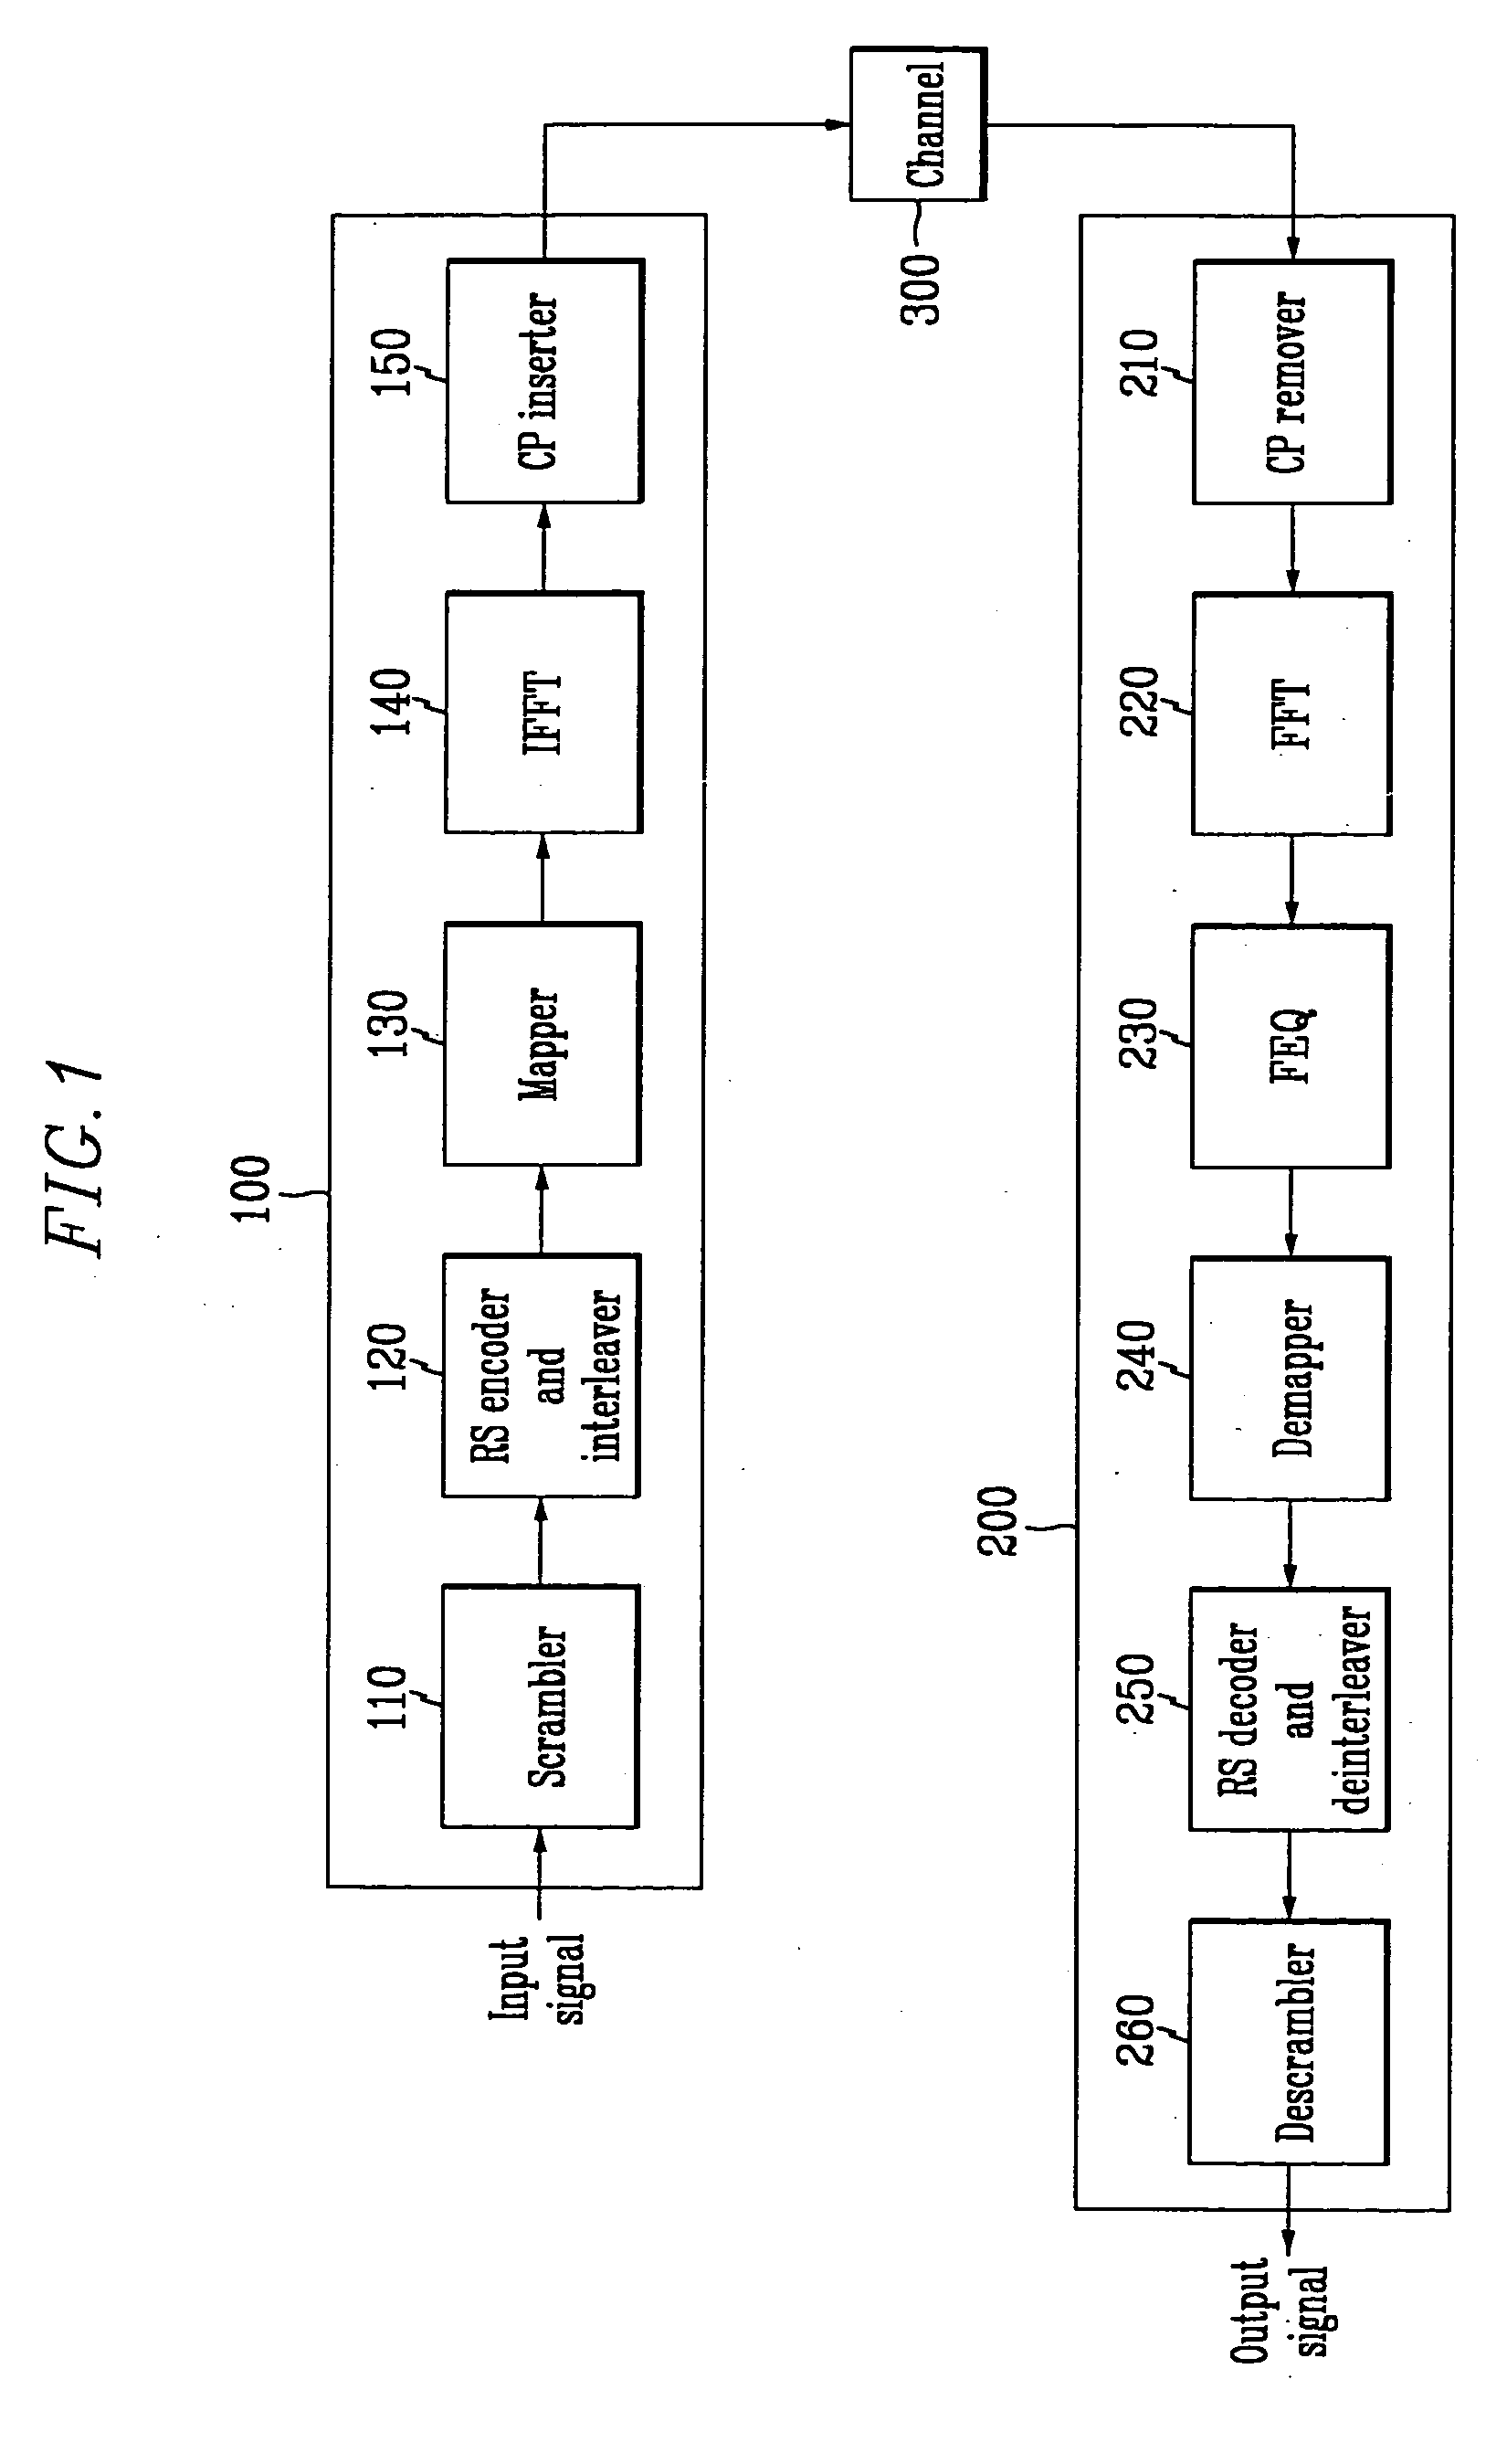 Vdsl system based on dmt line coding, and method for determining length of cyclic prefix samples using the system